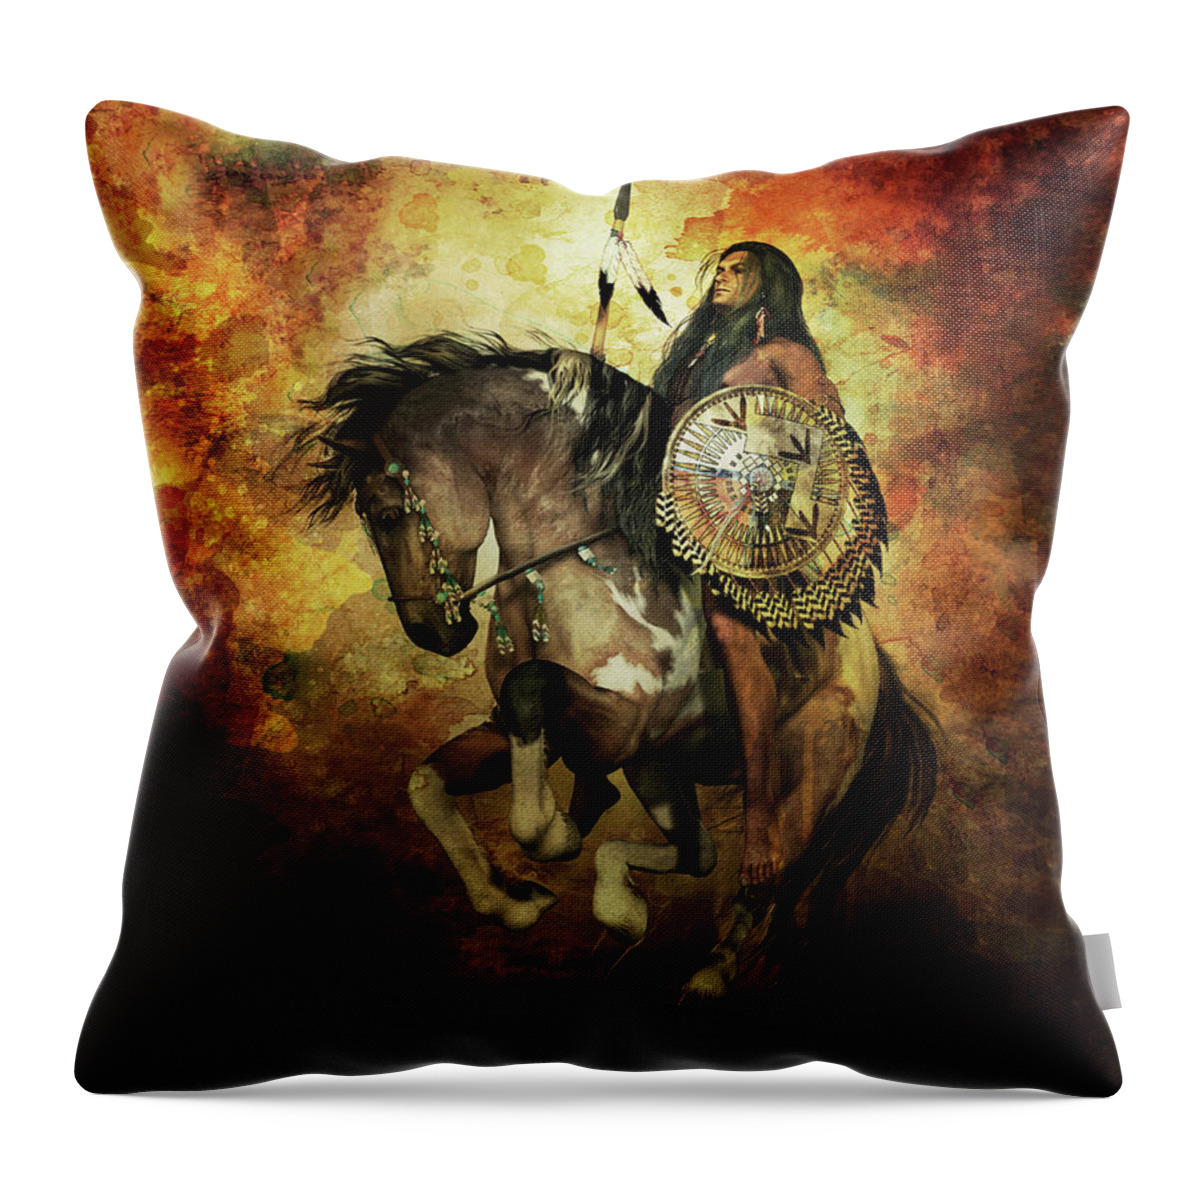 Courage Throw Pillow featuring the digital art Warrior by Shanina Conway